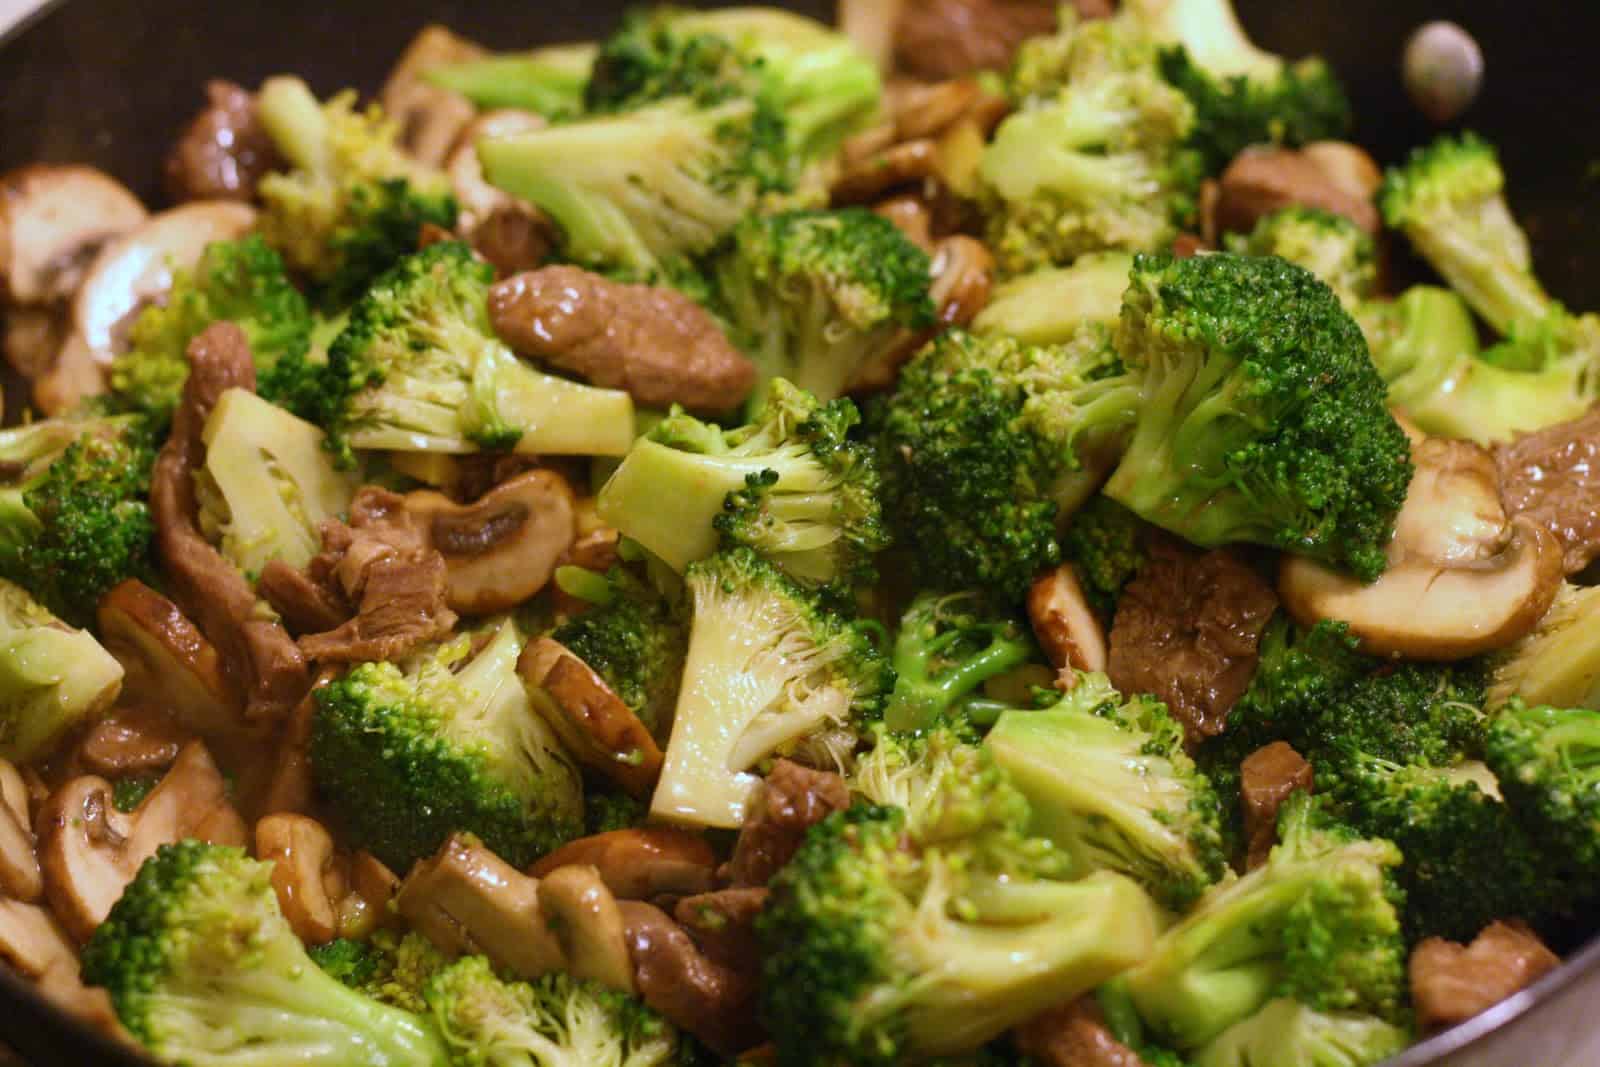 Beef and broccoli with mushrooms